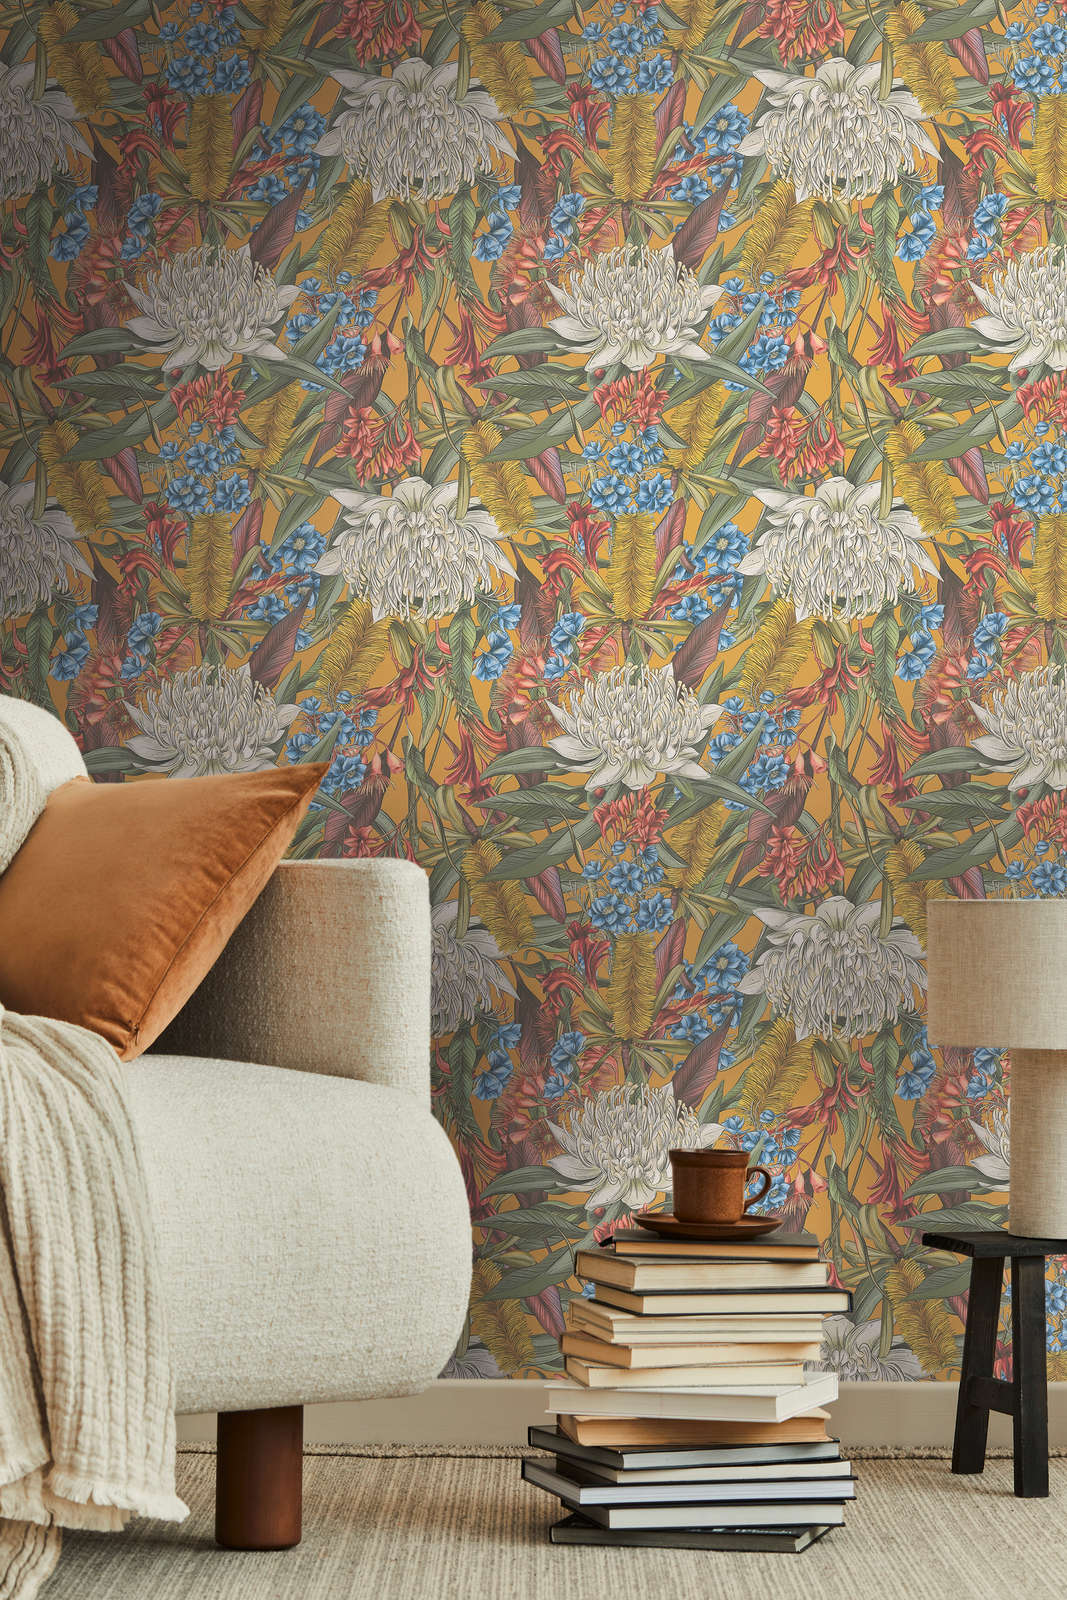             Floral style jungle wallpaper with leaves & flowers textured matt - multicoloured, yellow, green
        